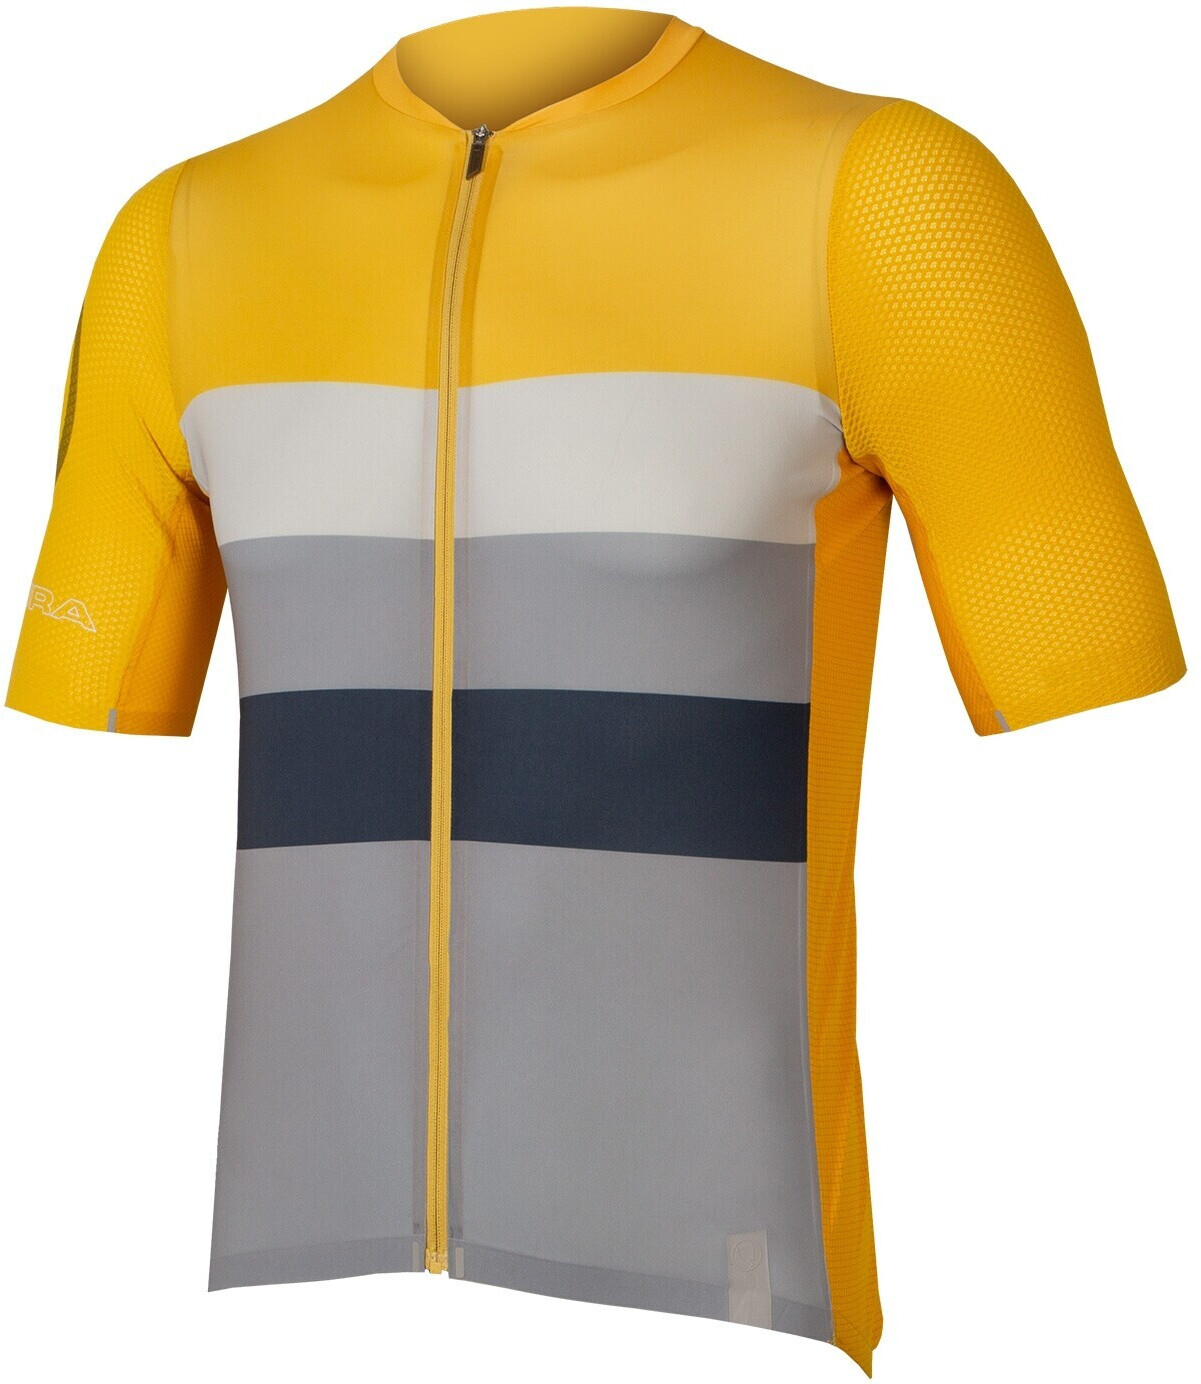 Endura Pro SL Race Short Sleeve Jersey mustard - In The Know Cycling